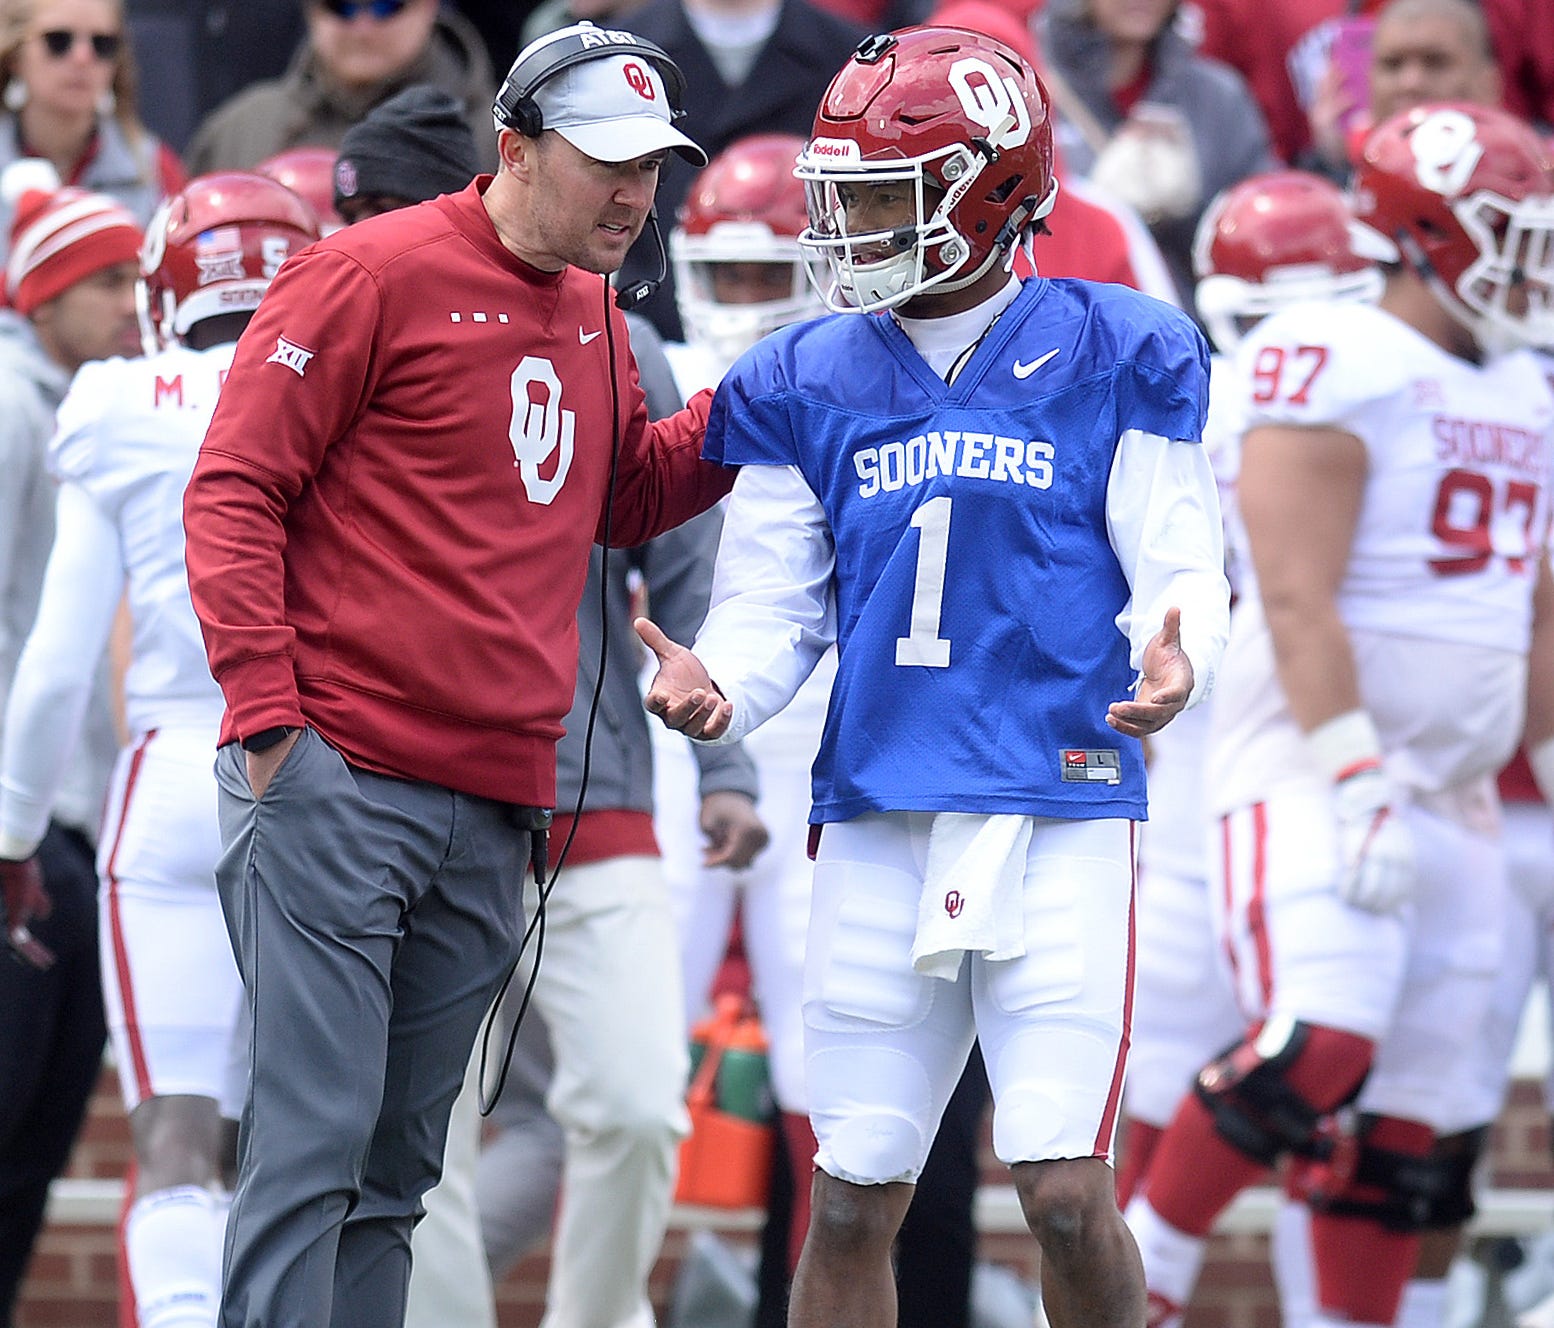 Oklahoma coach Lincoln Riley speaks to quarterback Kyler Murray during the team's spring game at Gaylord Family Memorial Stadium.